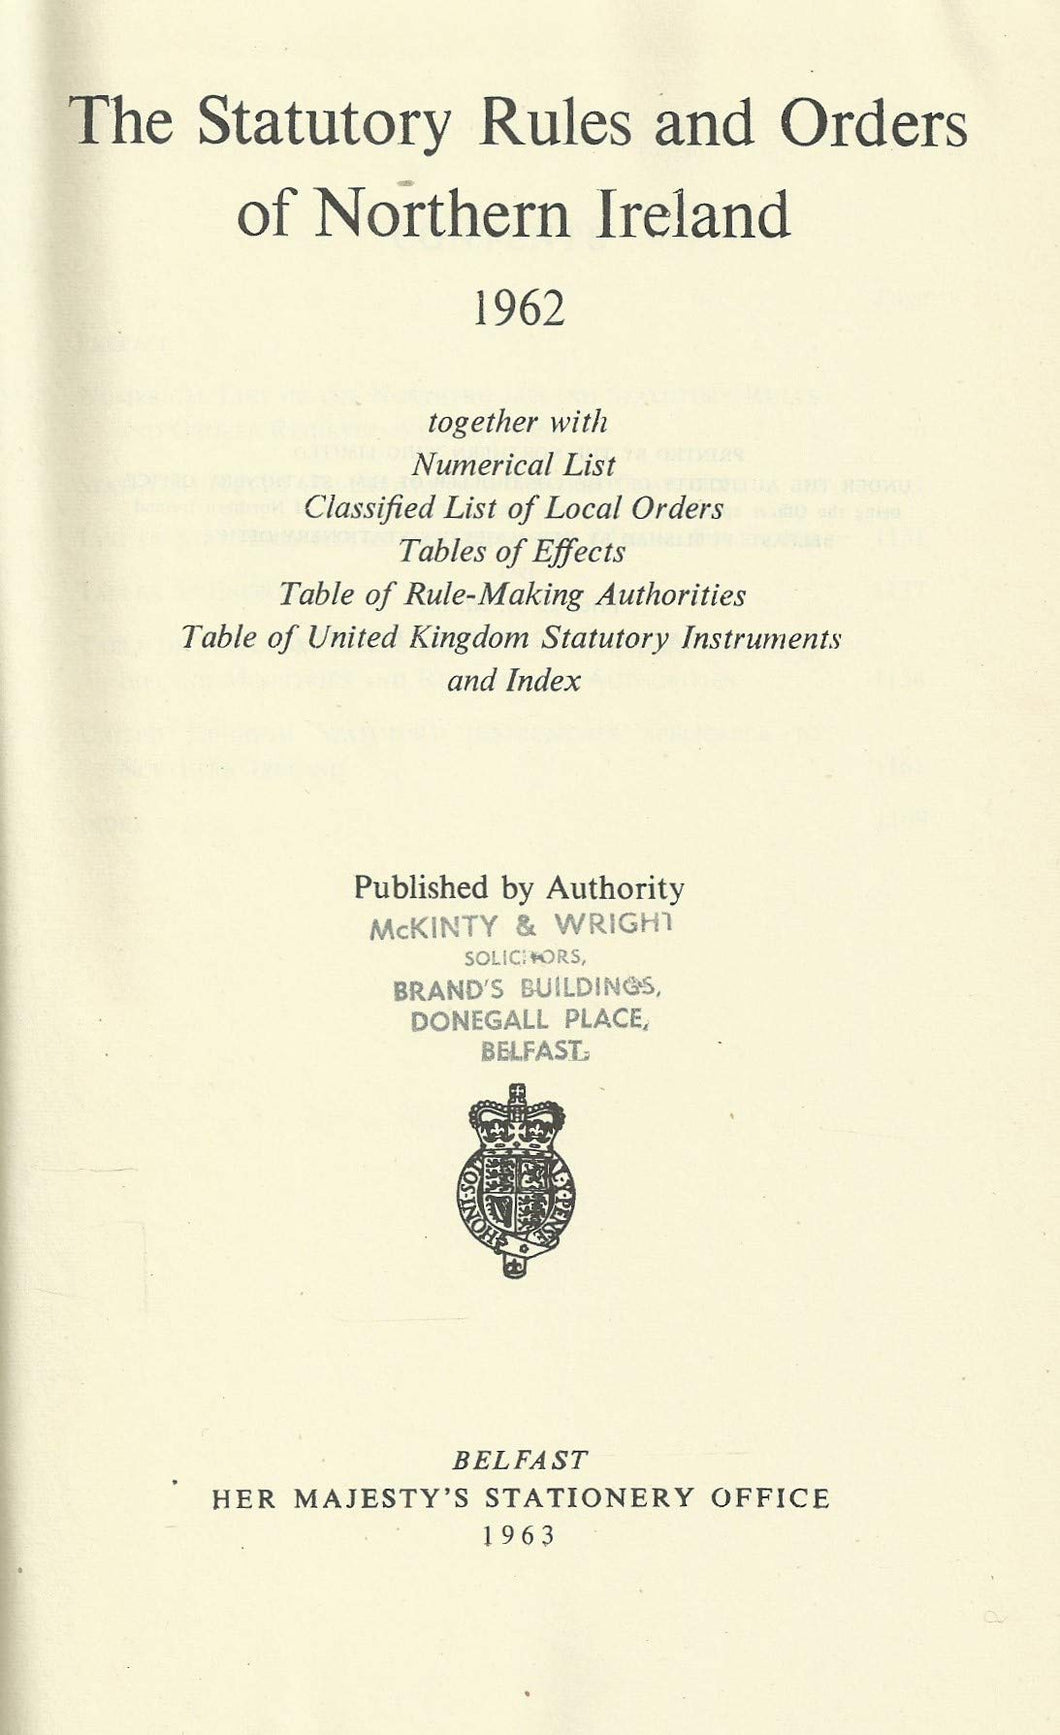 Northern Ireland Statutory Rules and Orders, 1962 - The Statutory Rules and Orders of Northern Ireland